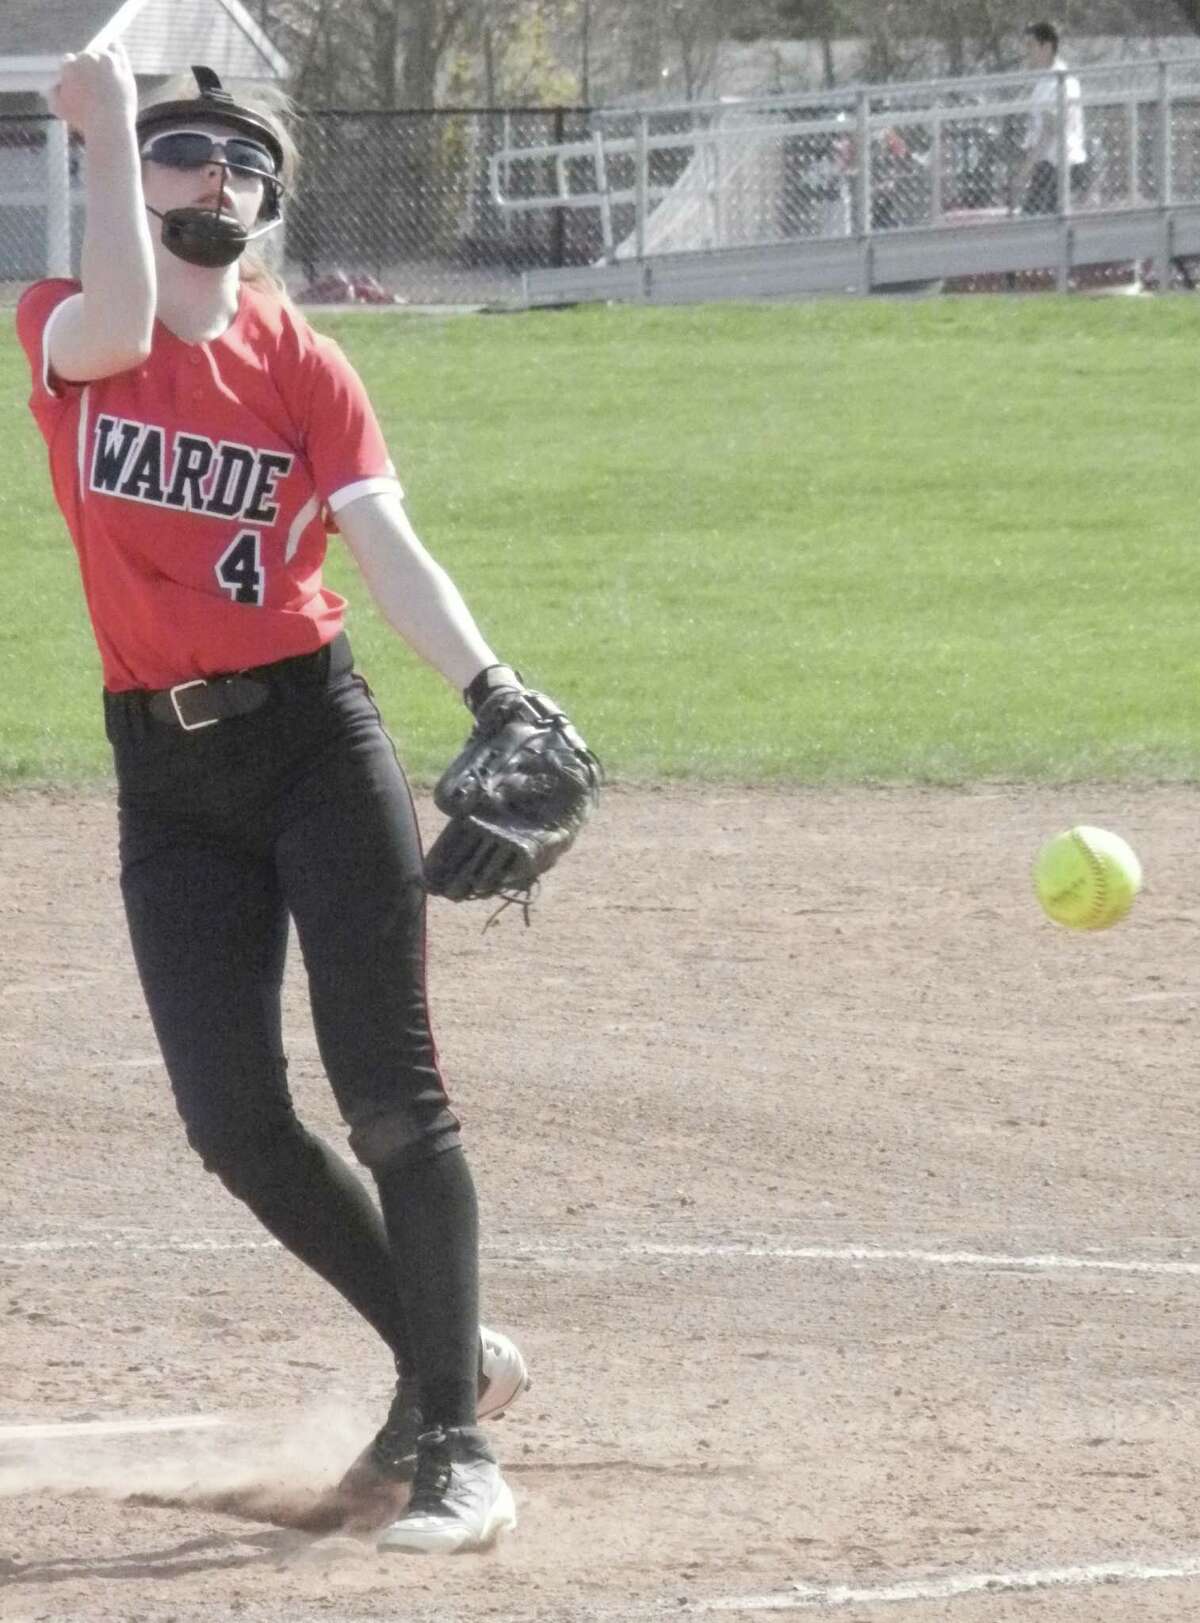 Fairfield Warde sophomore pitcher Gabriella Natoli gave up four hits on Friday, April 25 in the Mustangs' 1-0 win over Staples in an FCIAC softball game in Fairfield.